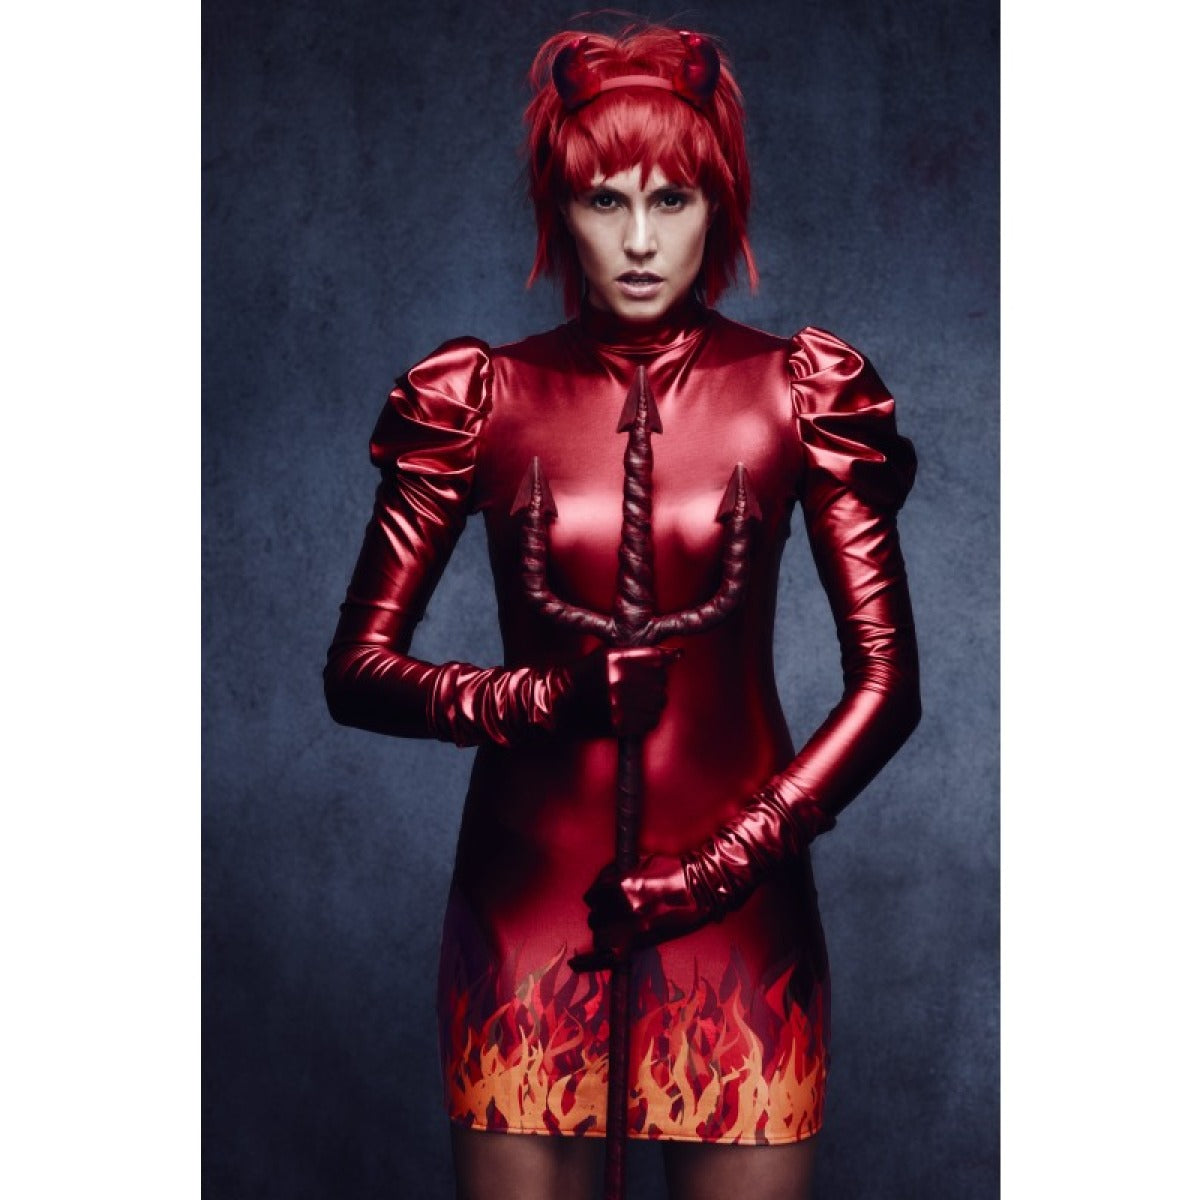 Fever Devil Women's Costume with horns Wet Look Fabric